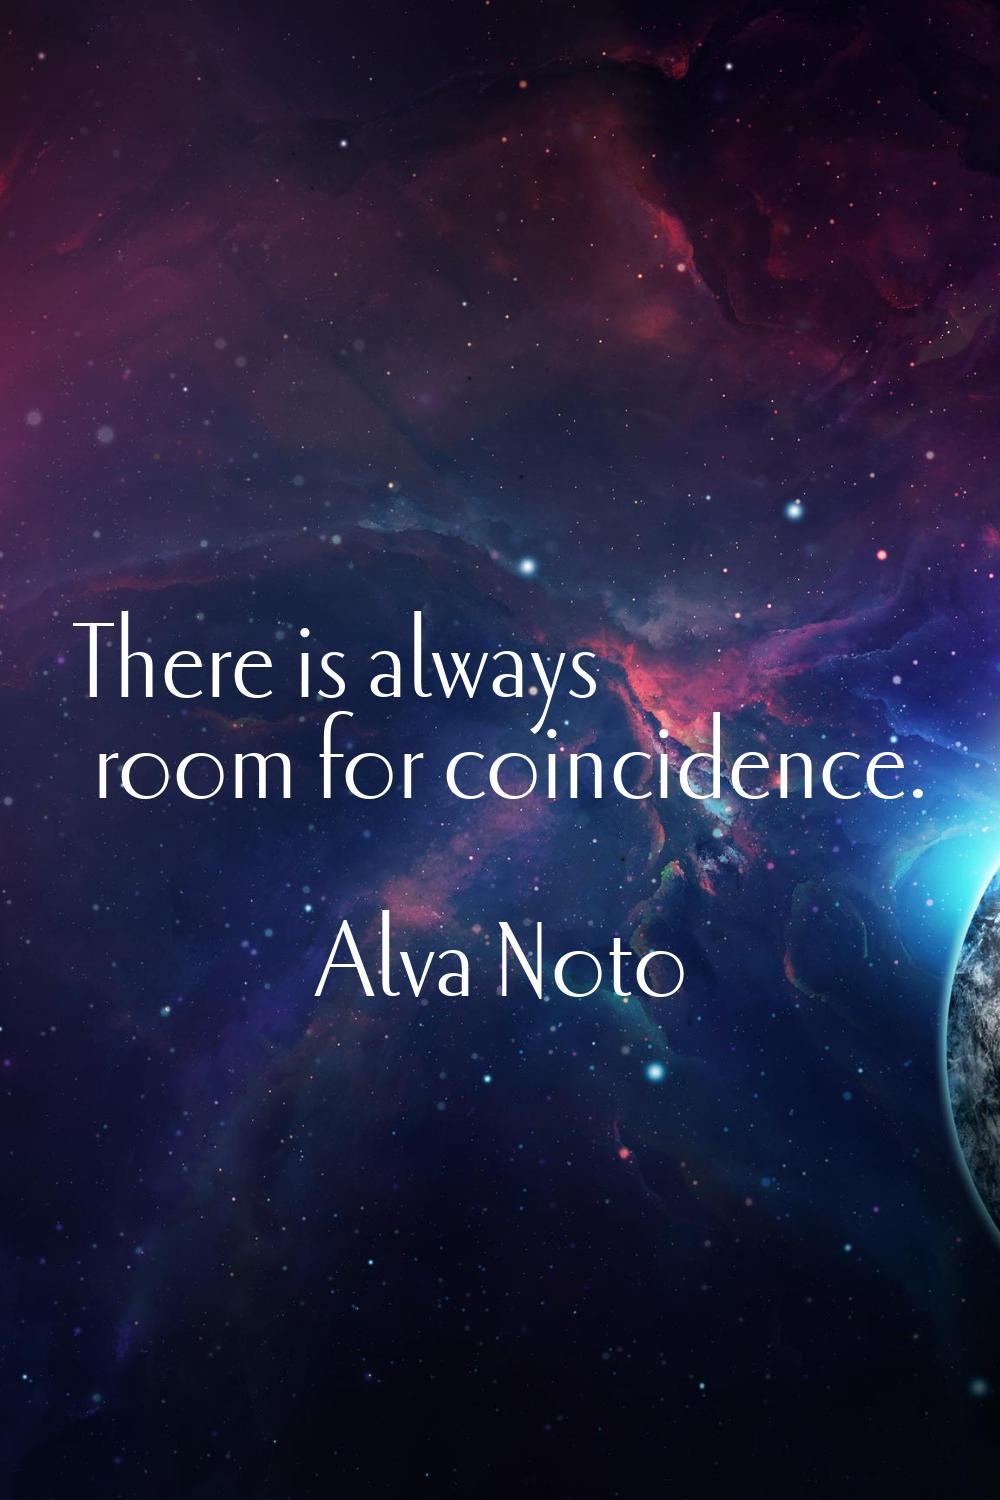 There is always room for coincidence.